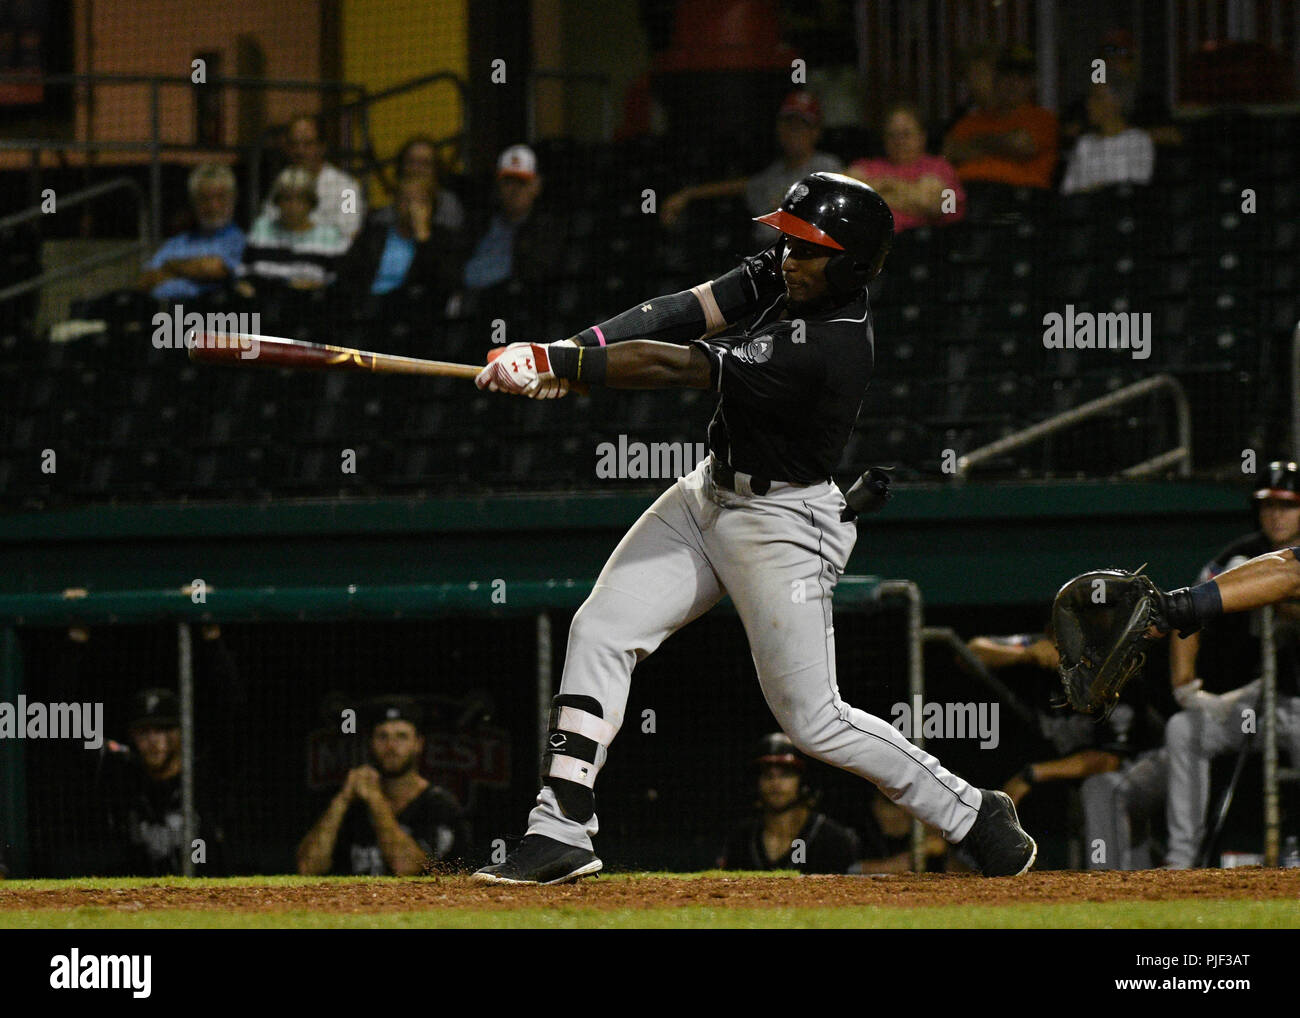 The Second Round. 6th Sep, 2018. USA Lansing Lugnuts left fielder Norberto Obeso (9) gets a double during a Mid West League series between the Lansing Lugnuts and the Bowling Green Hot Rods in Bowling Green, KY st Bowling Green Ballpark. Hot Rods sweep Lugnuts and advance to the second round. (Mandatory Photo Credit: Steve Roberts/CSM) Credit: csm/Alamy Live News Stock Photo